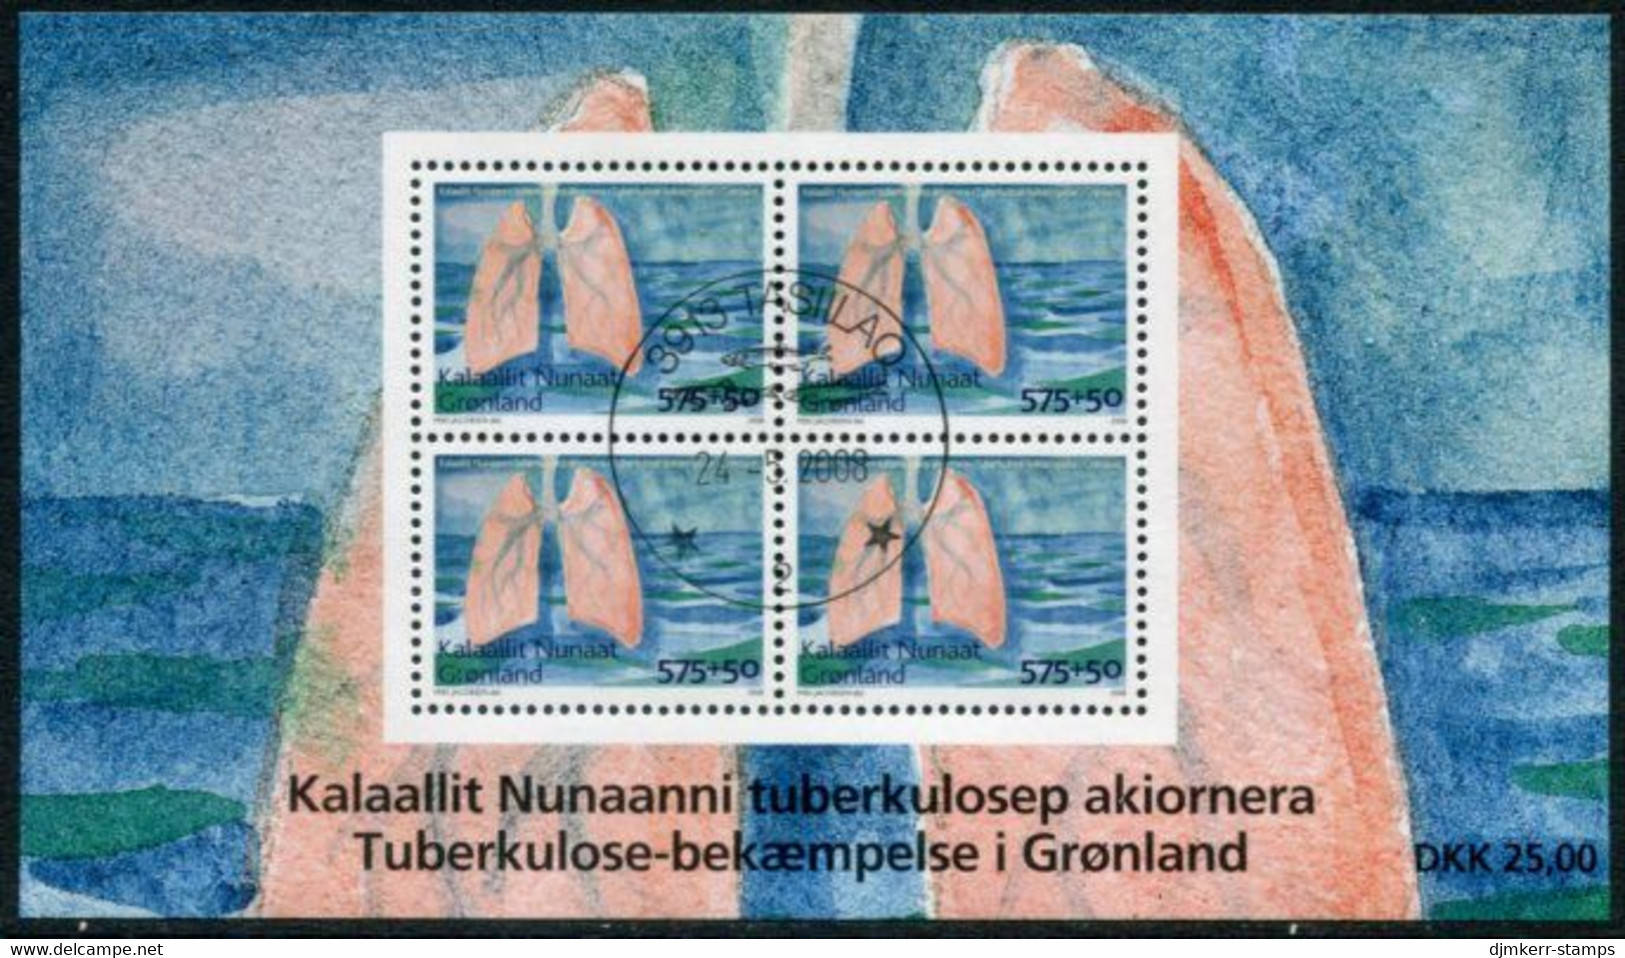 GREENLAND 2008 Tuberculosis Campaign Block Used.   Michel Block 41 - Used Stamps